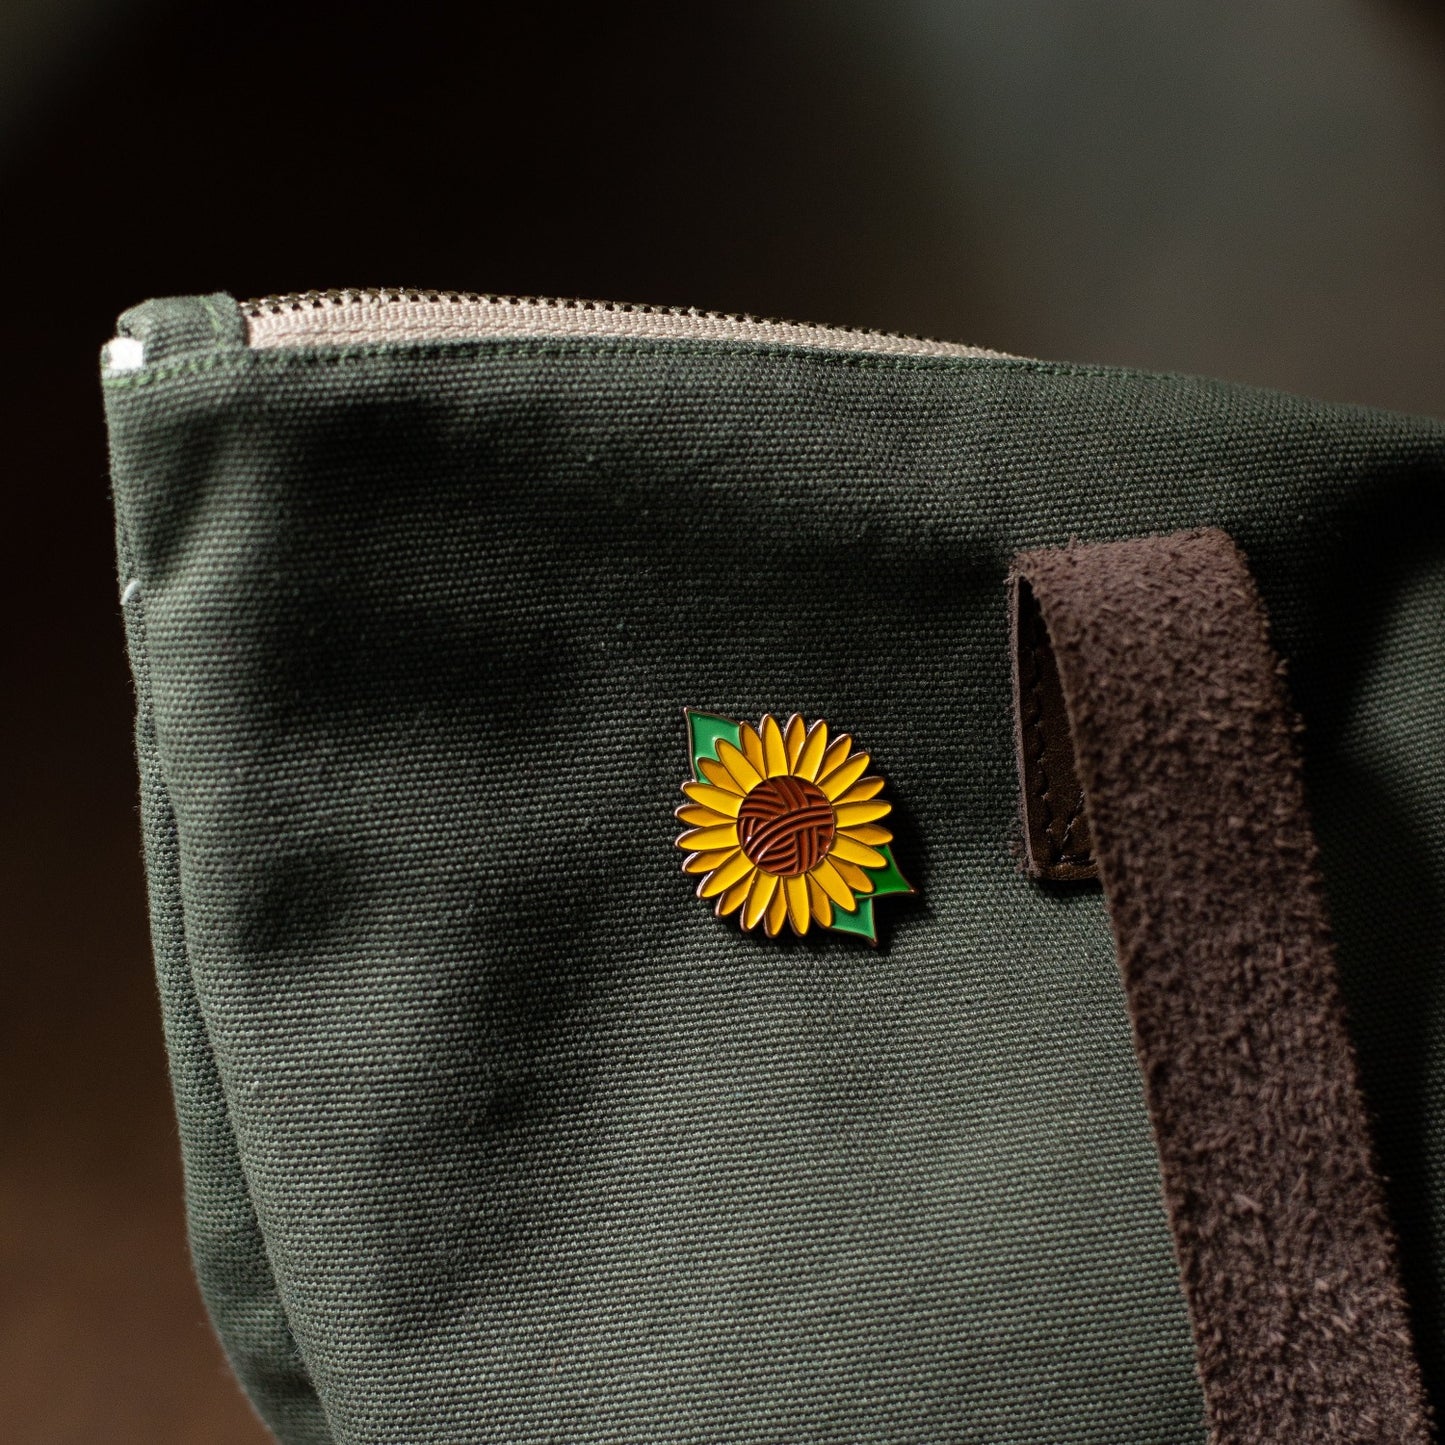 Sunflower Hard Enamel Pin Gold Sun Flower Pin With Butterfly Clasp  Wildflowers Pin Flag Yellow Pin -  Israel